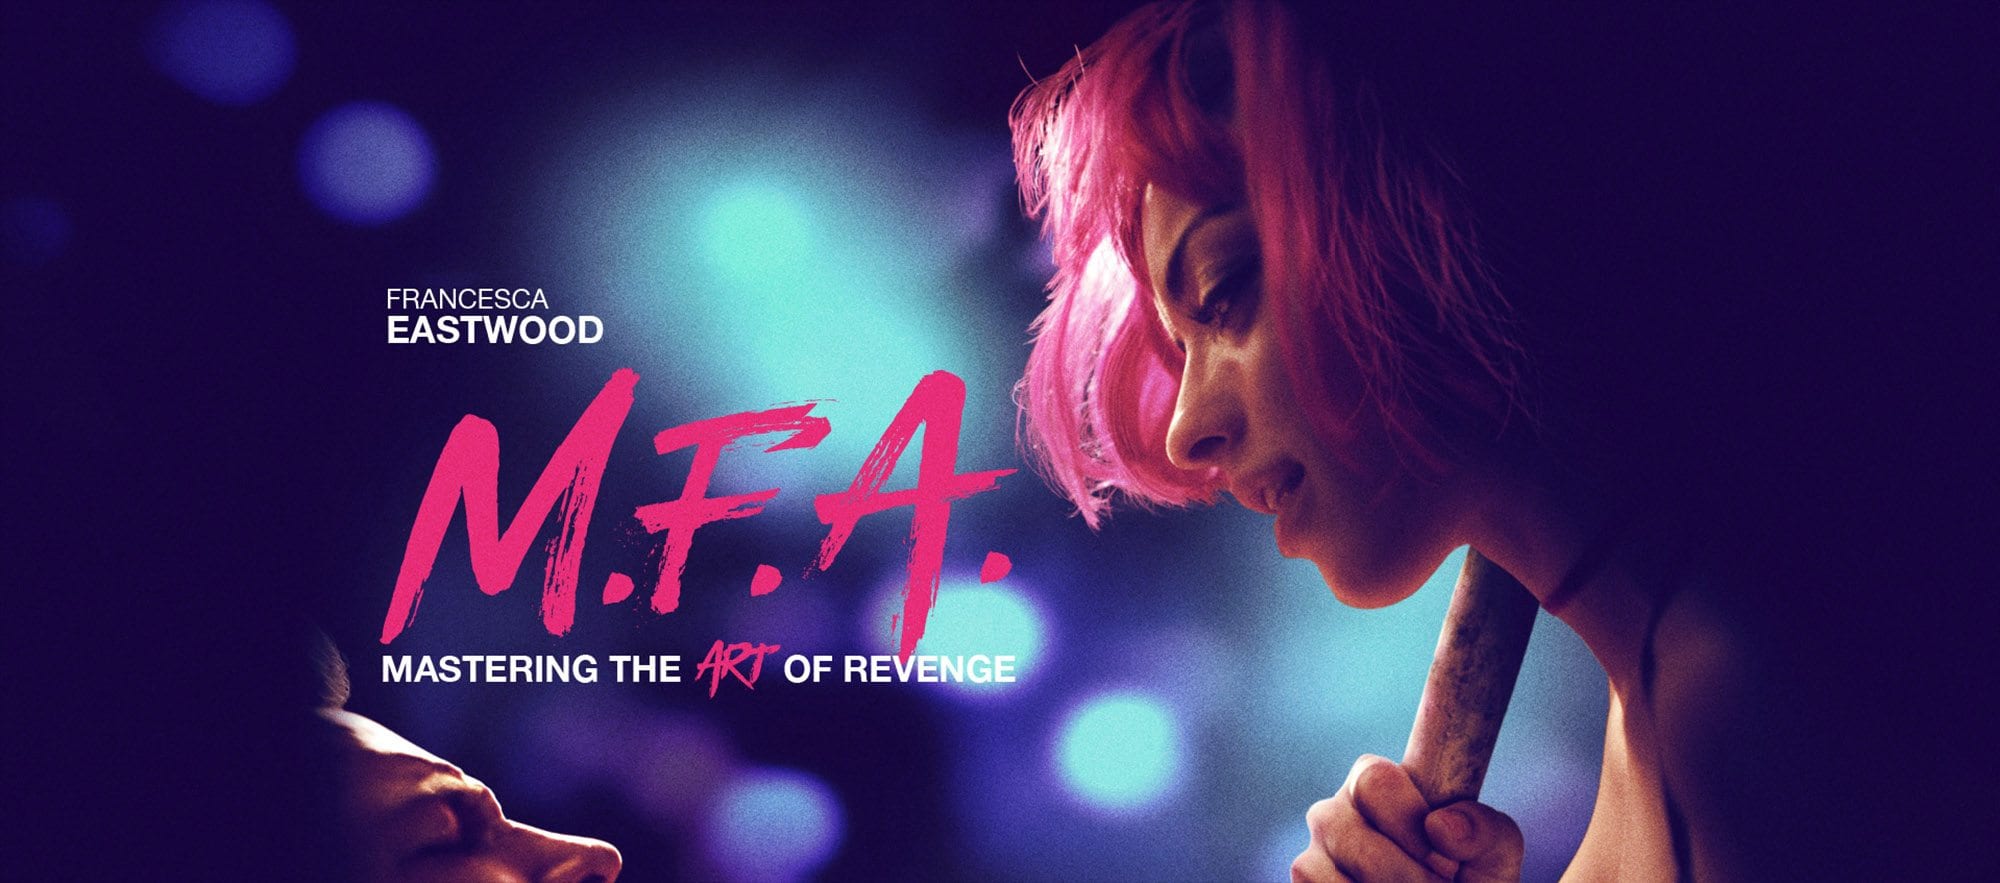 We caught up with 'M.F.A.' director Natalia Leite to discuss the making of the movie and where the horror genre is headed.